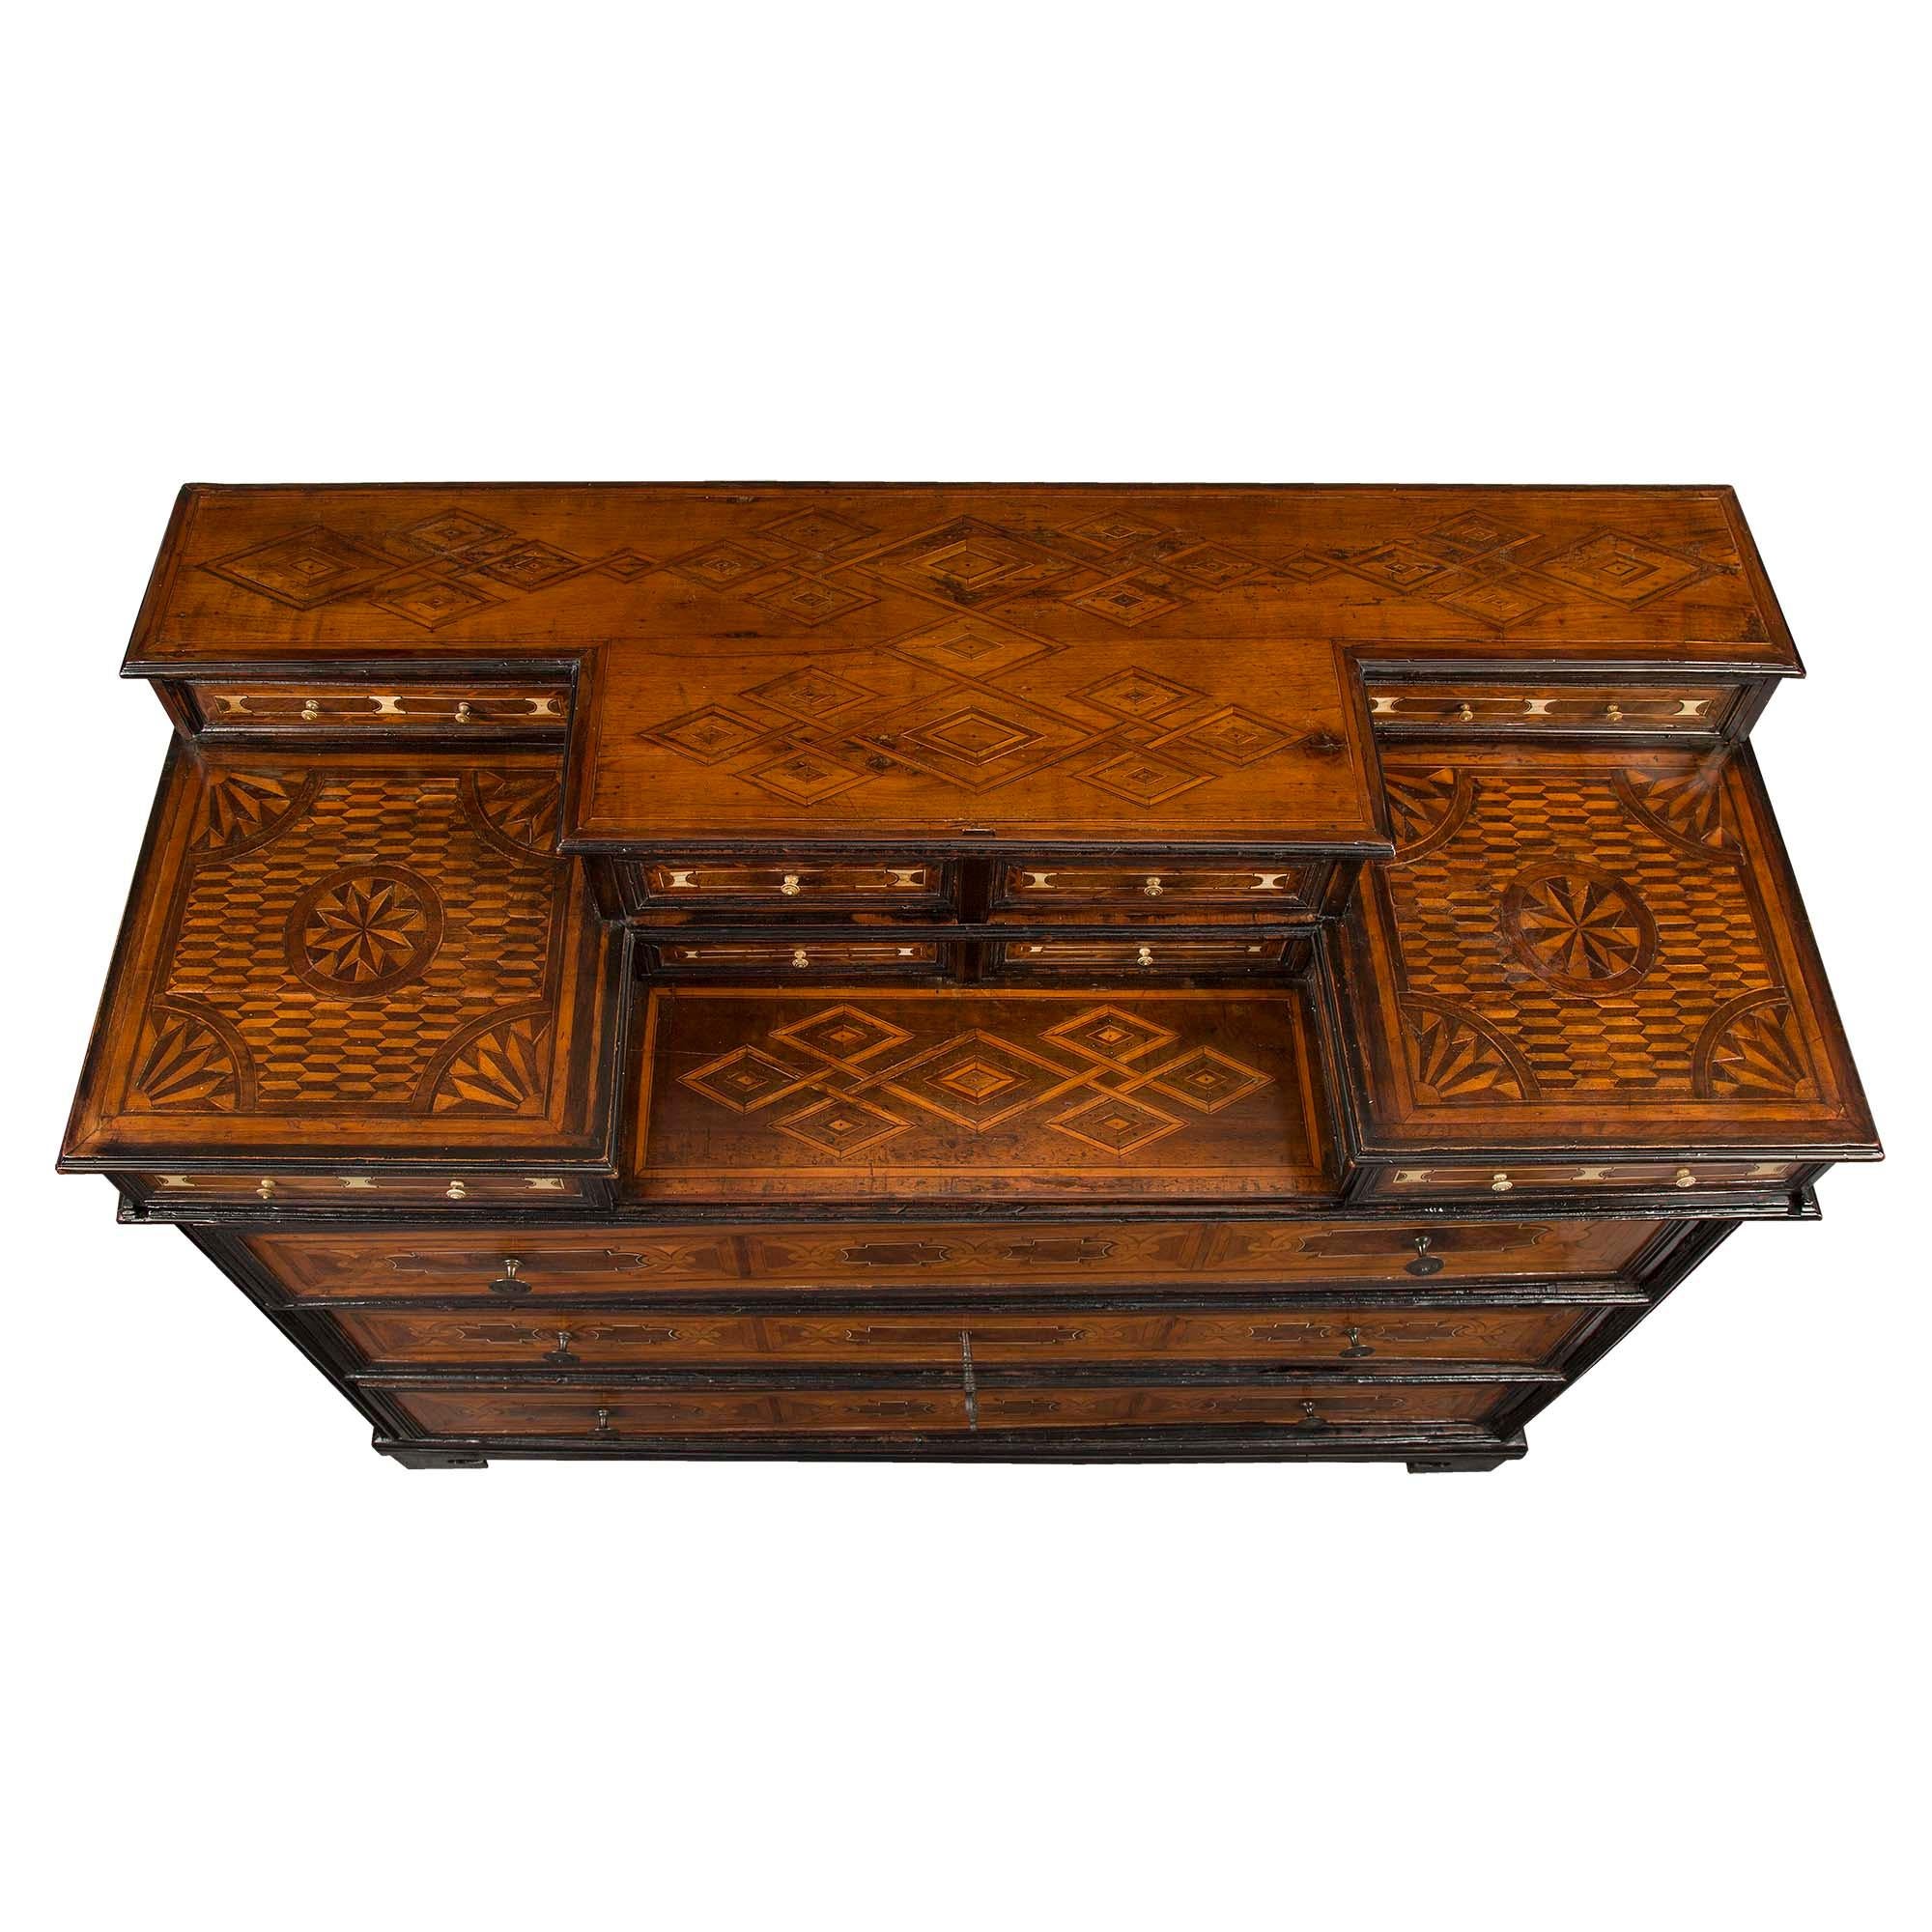 A handsome and very unique Northern Italian 17th century ebonized fruitwood and walnut inlaid chest, circa 1680. The chest is raised by a mottled support below three impressive drawers with turned pulls and striking interlocking bone inlays. Each